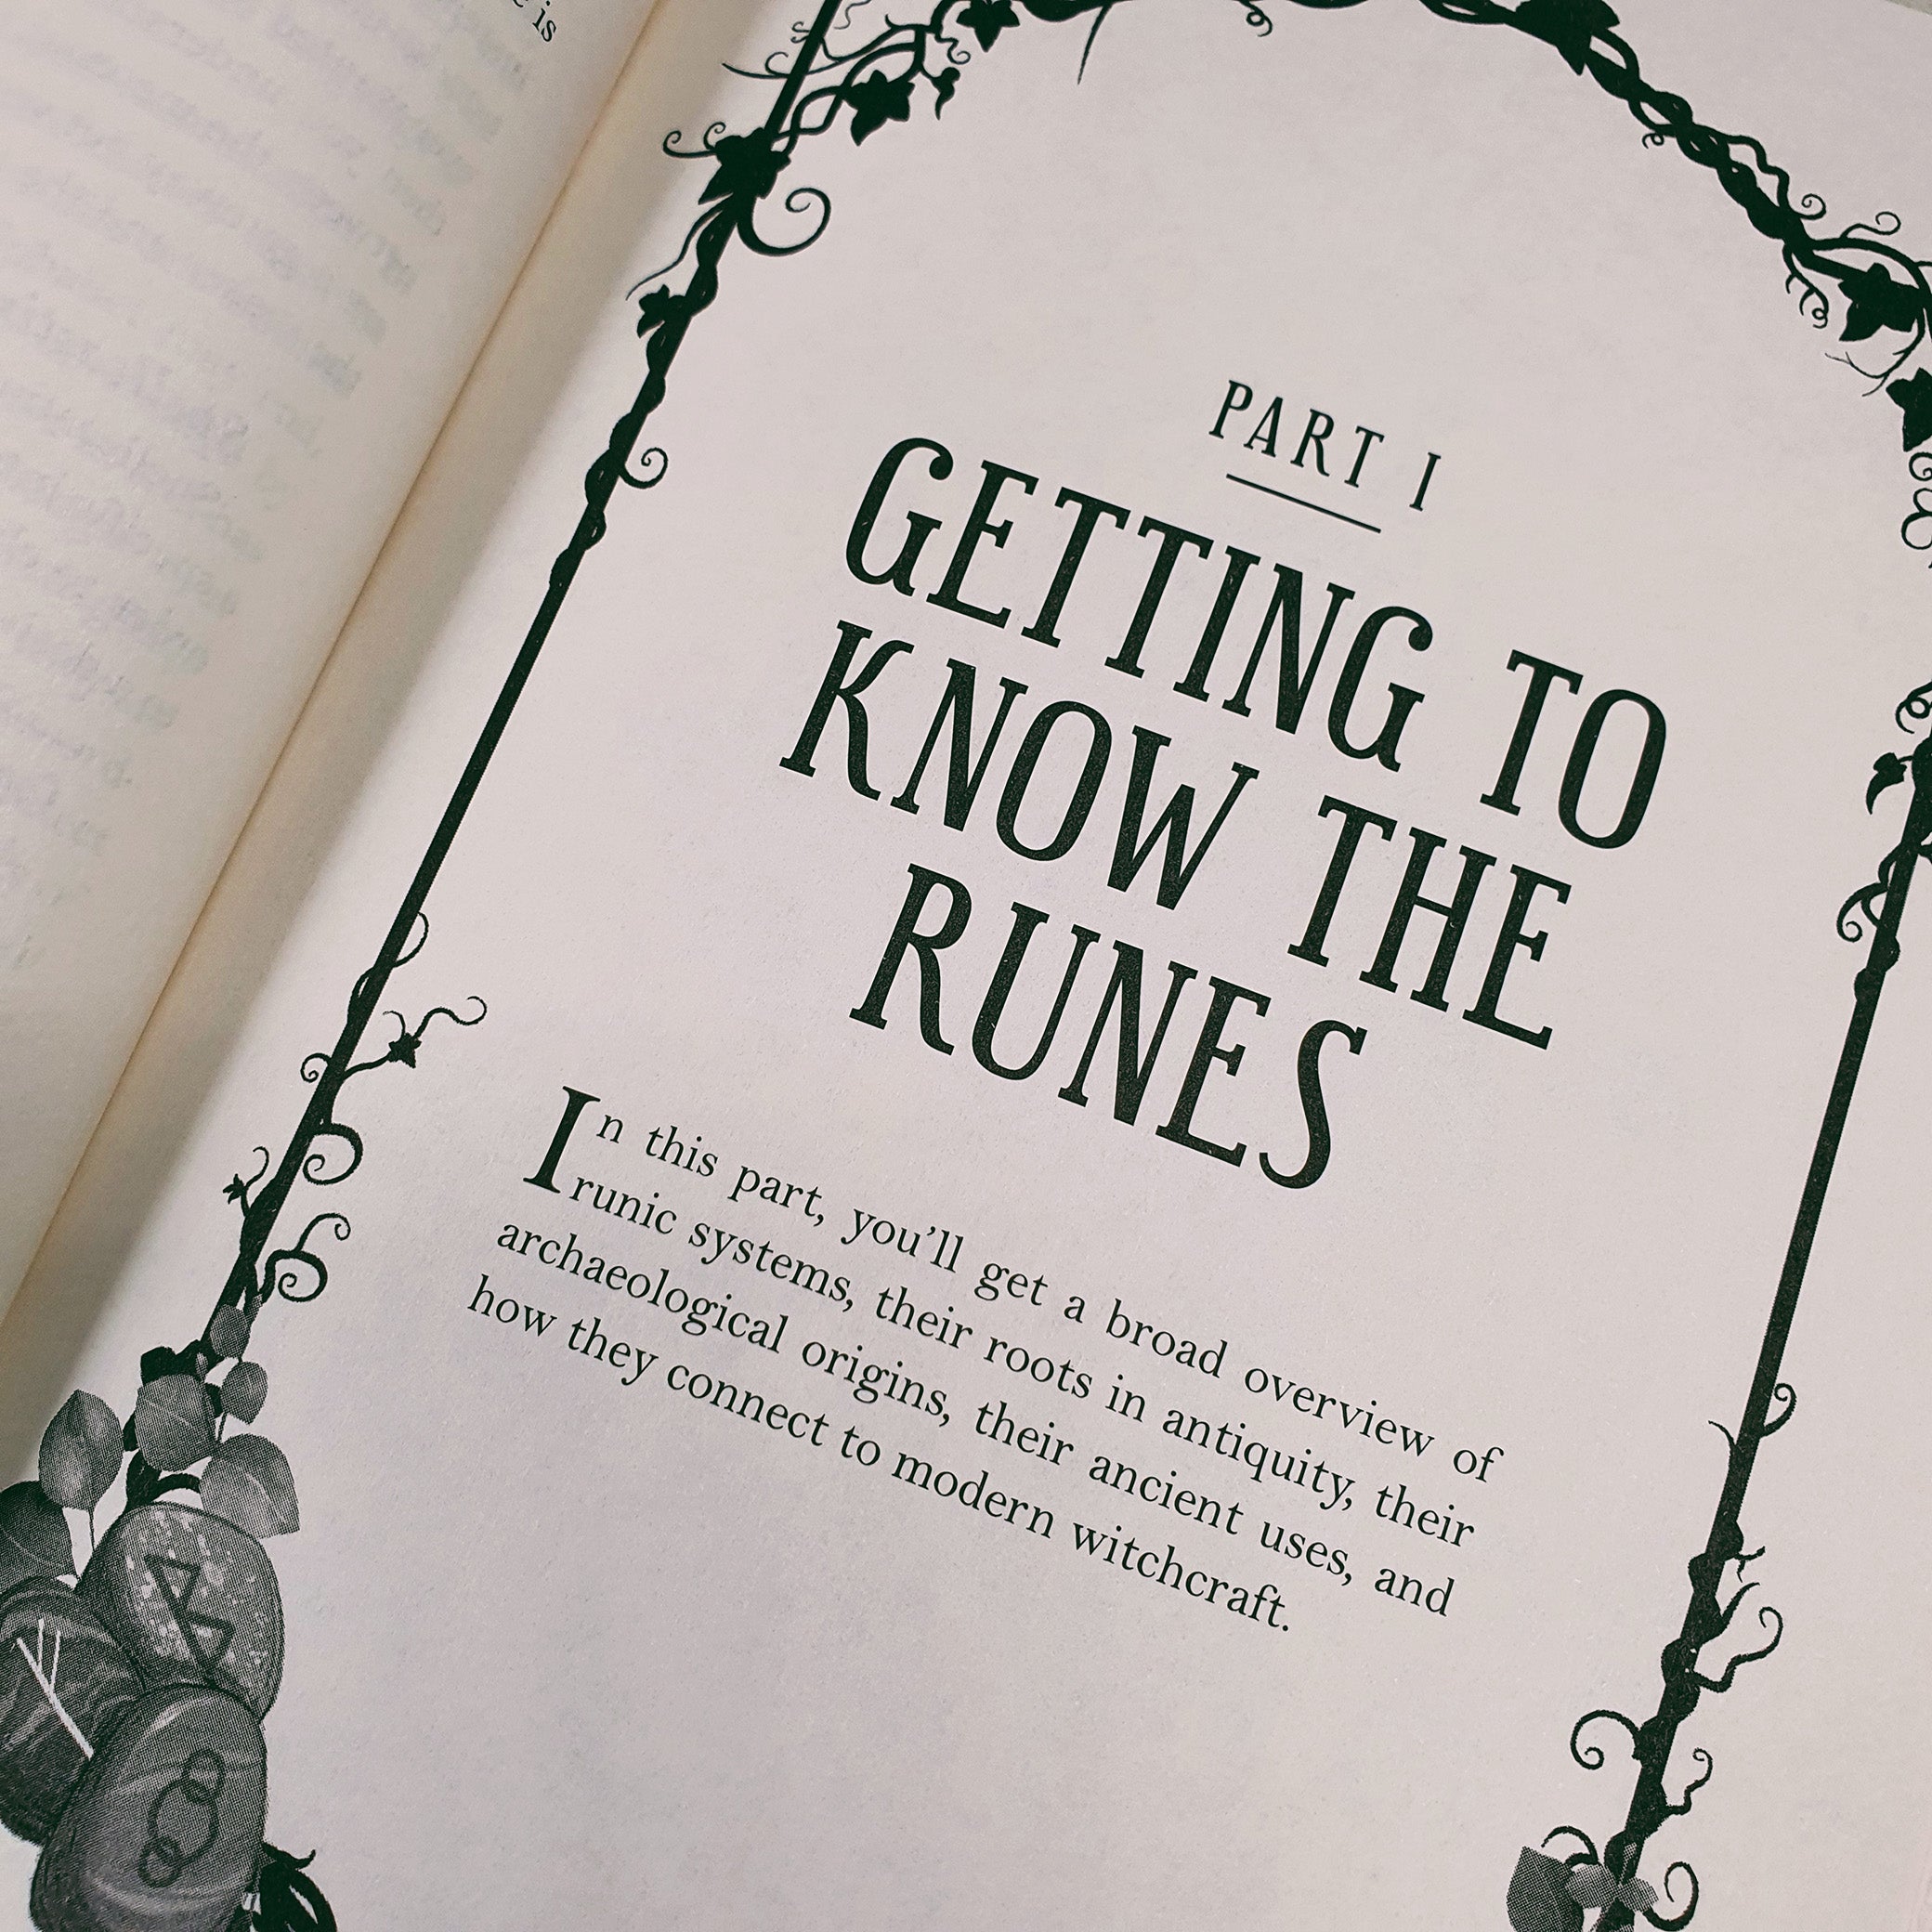 The Modern Witchcraft Guide to Runes: Your Complete Guide to the Divination Power of Runes